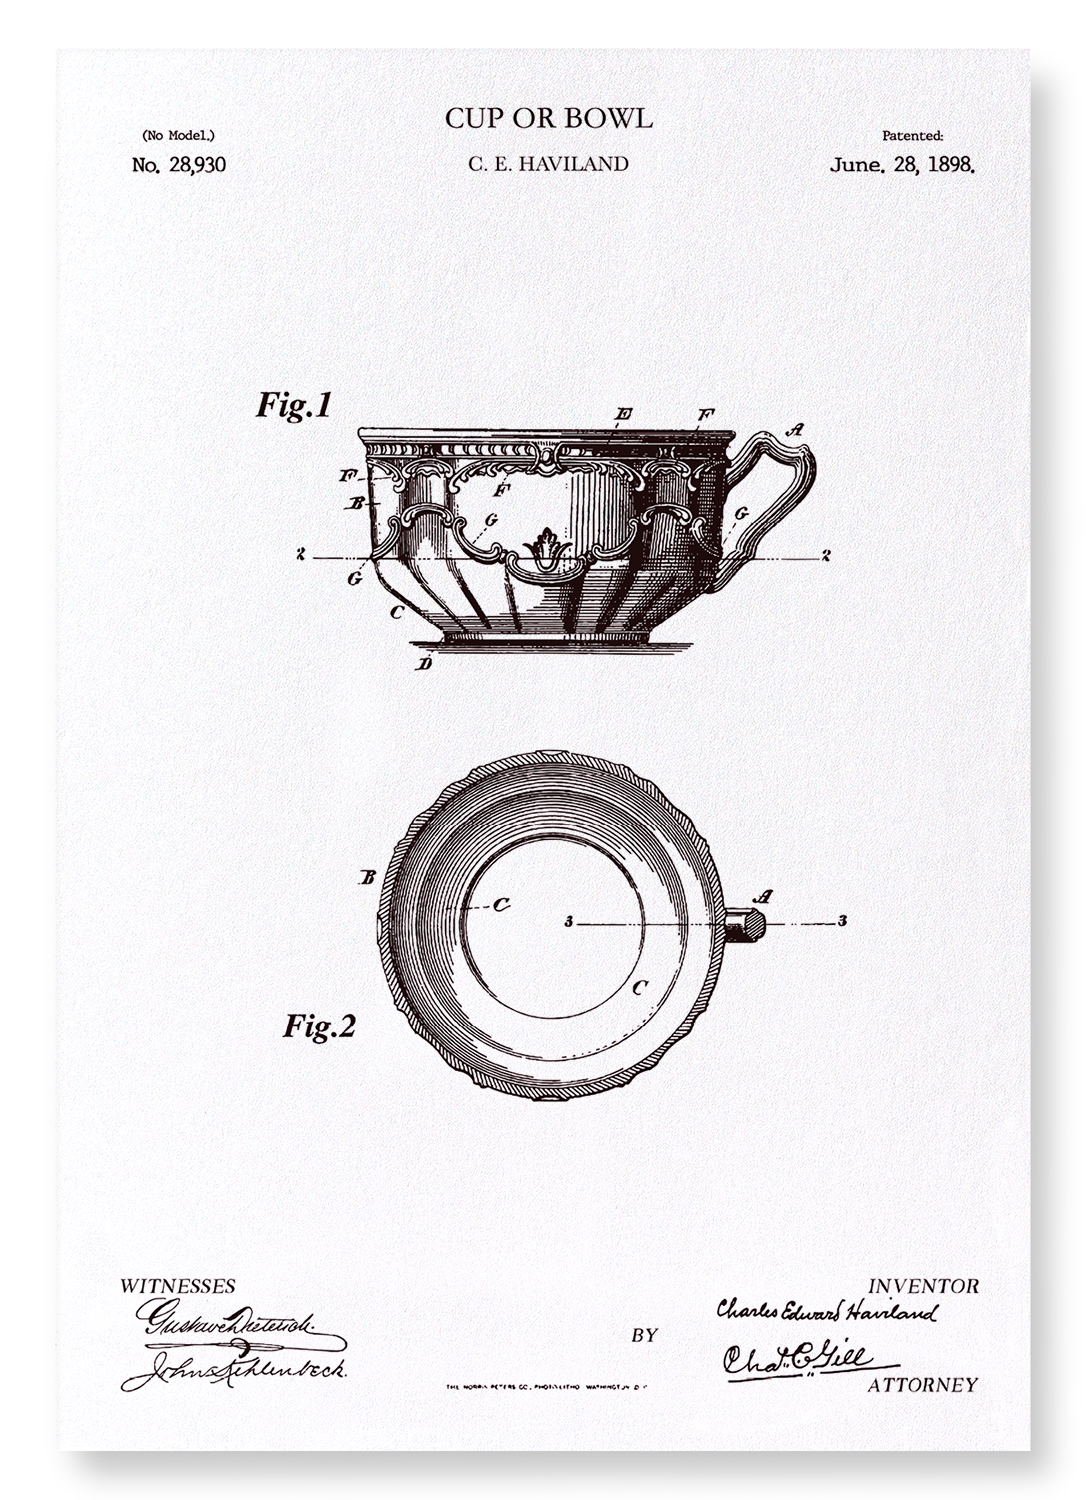 PATENT OF CUP OR BOWL (1898)